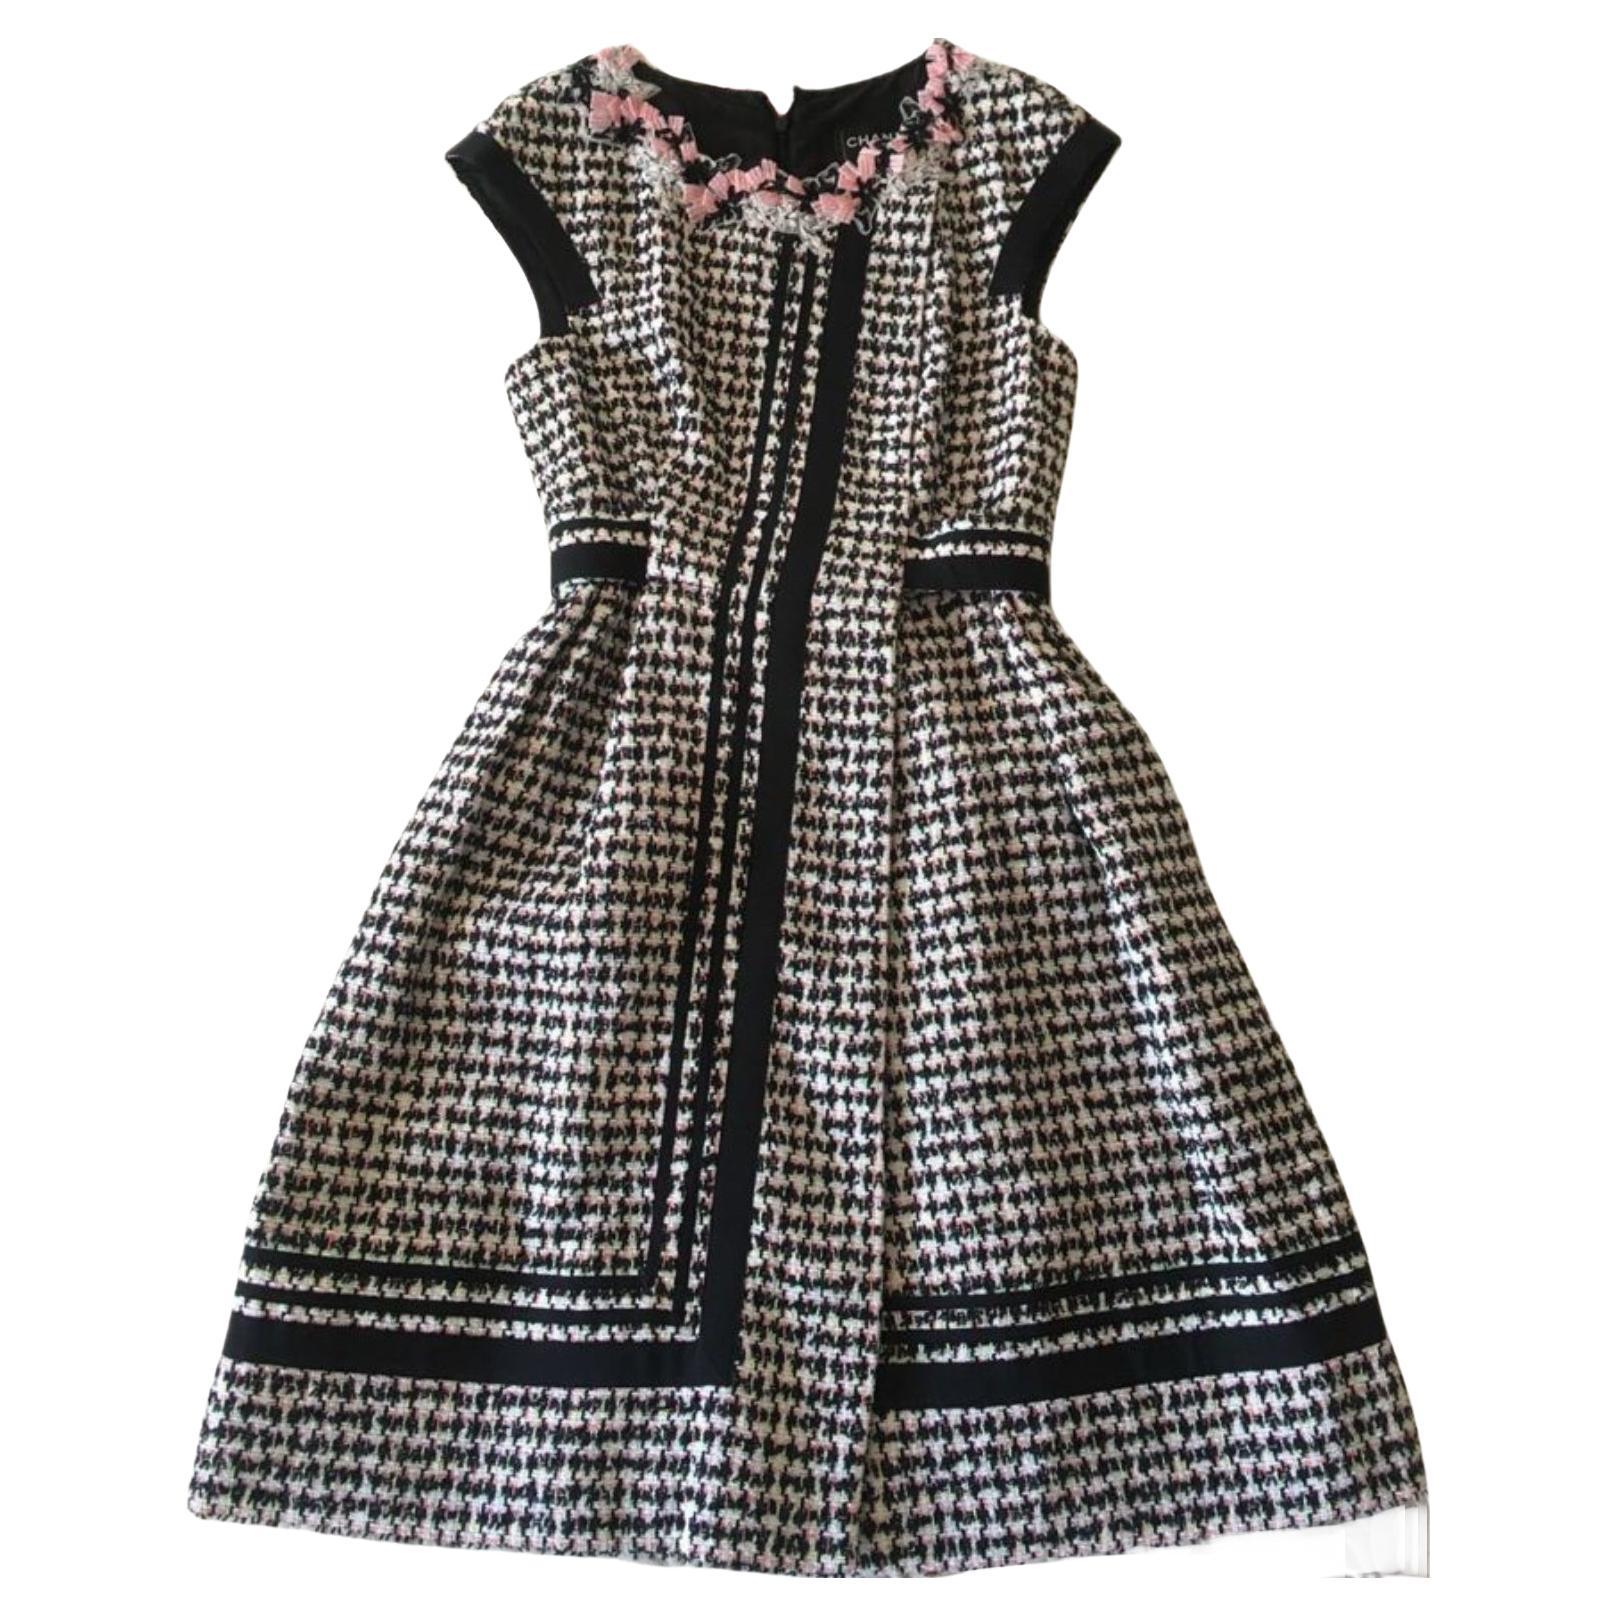 Rare Chanel Tweed Dress From 2010 Spring Collection. For Sale